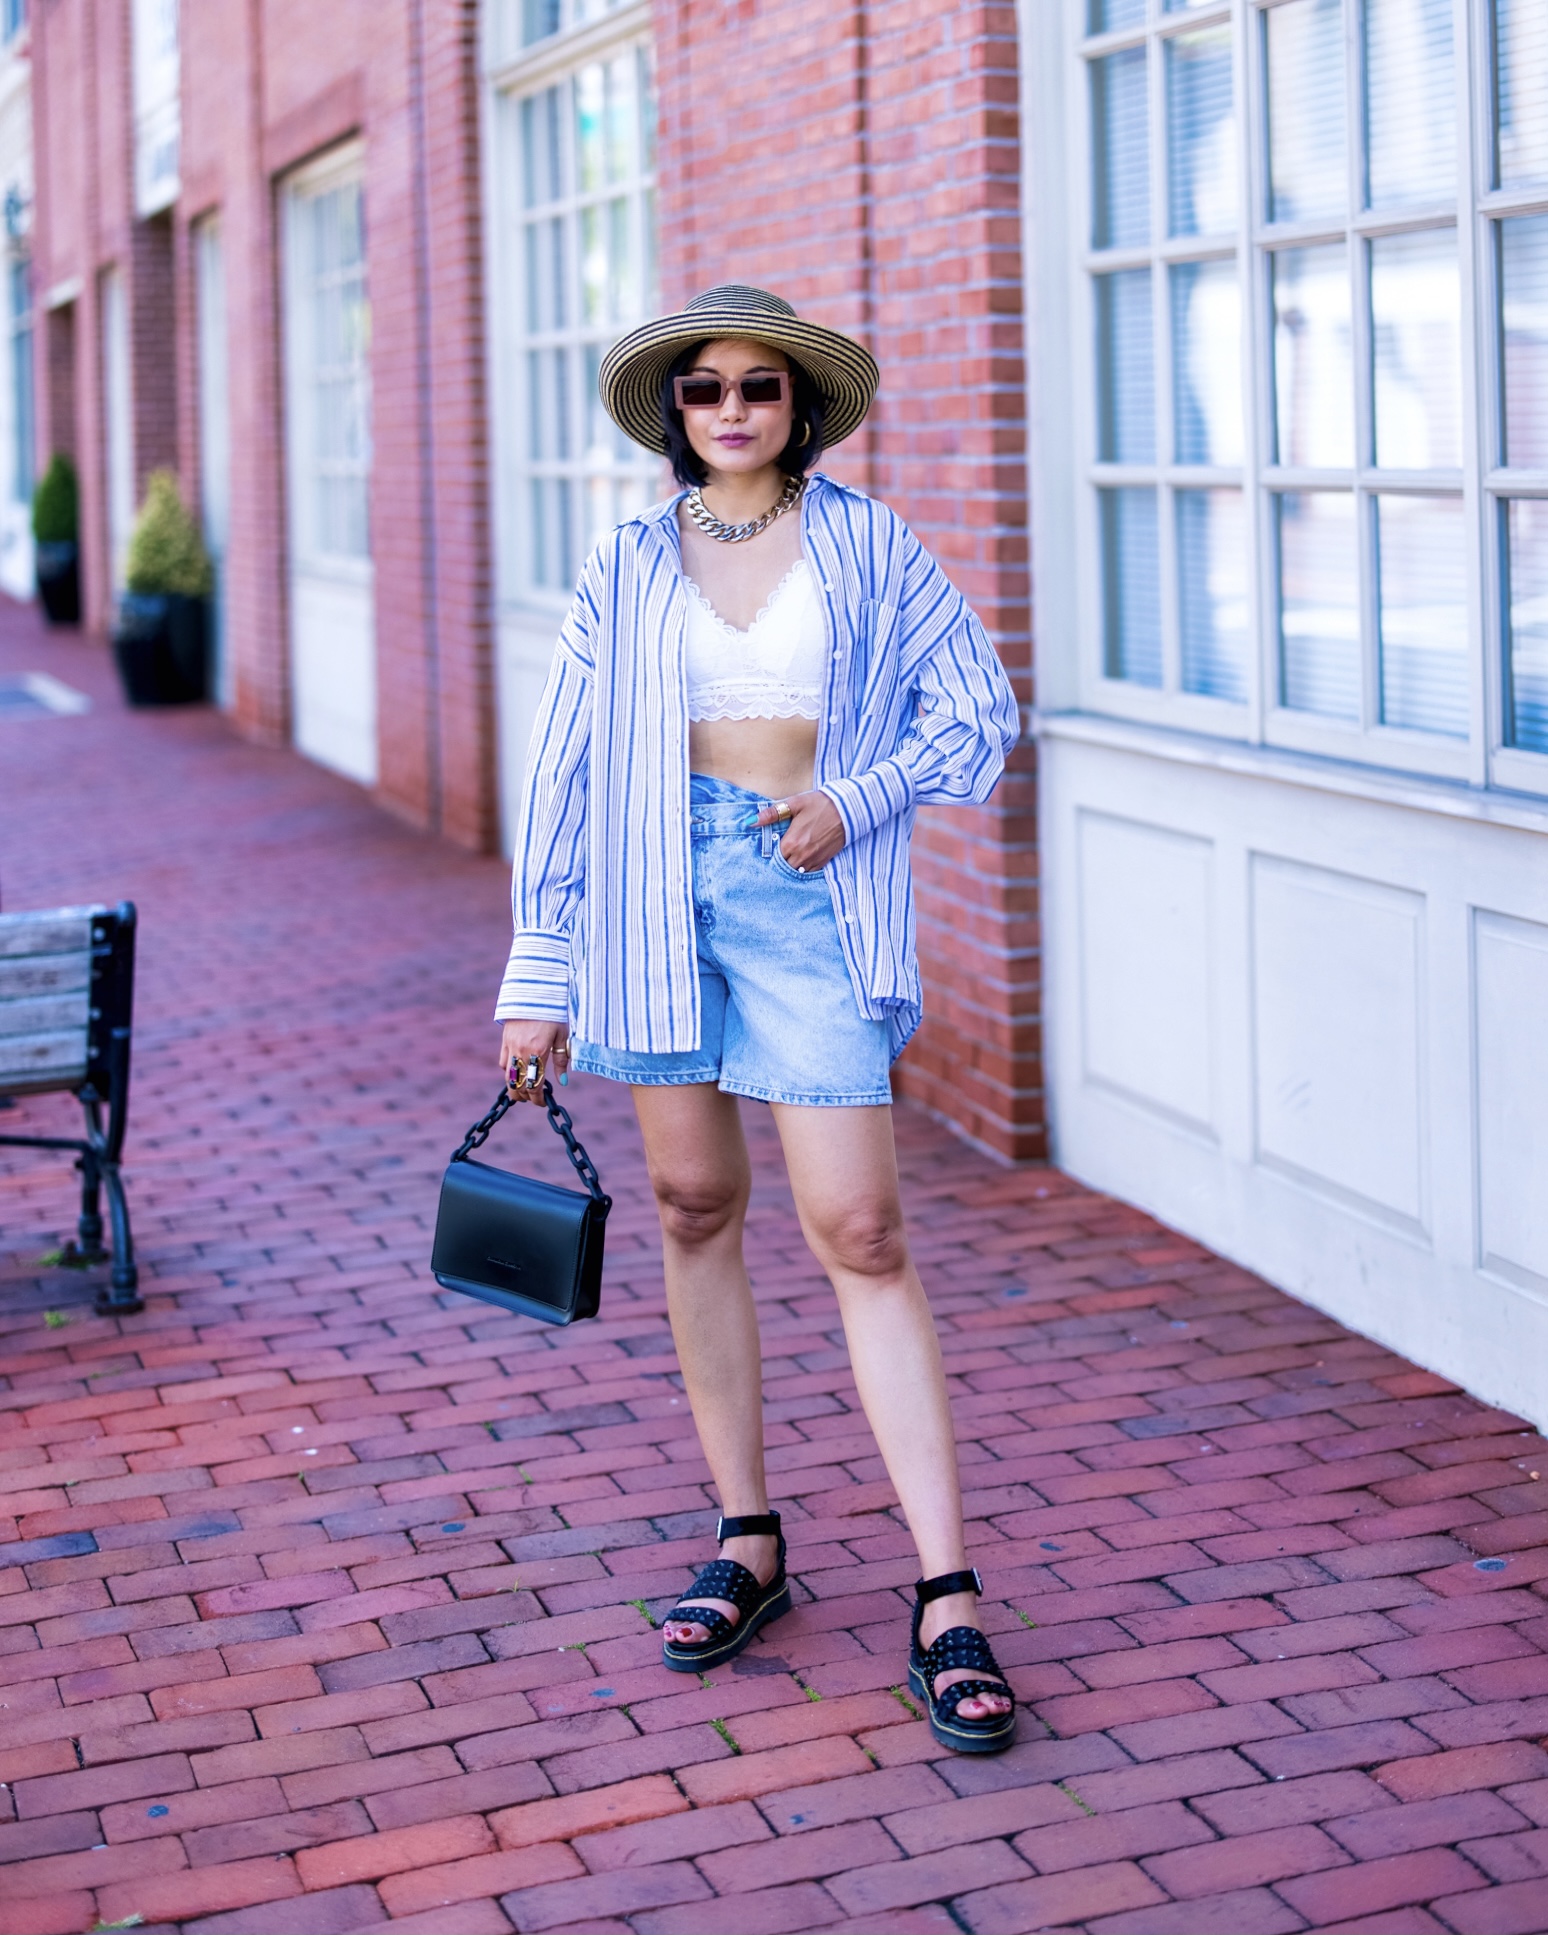 nanphanita jacob is rocking streetwear with a lace barrette pairing with criss cross short denims and top off with an oversized stripe shirt